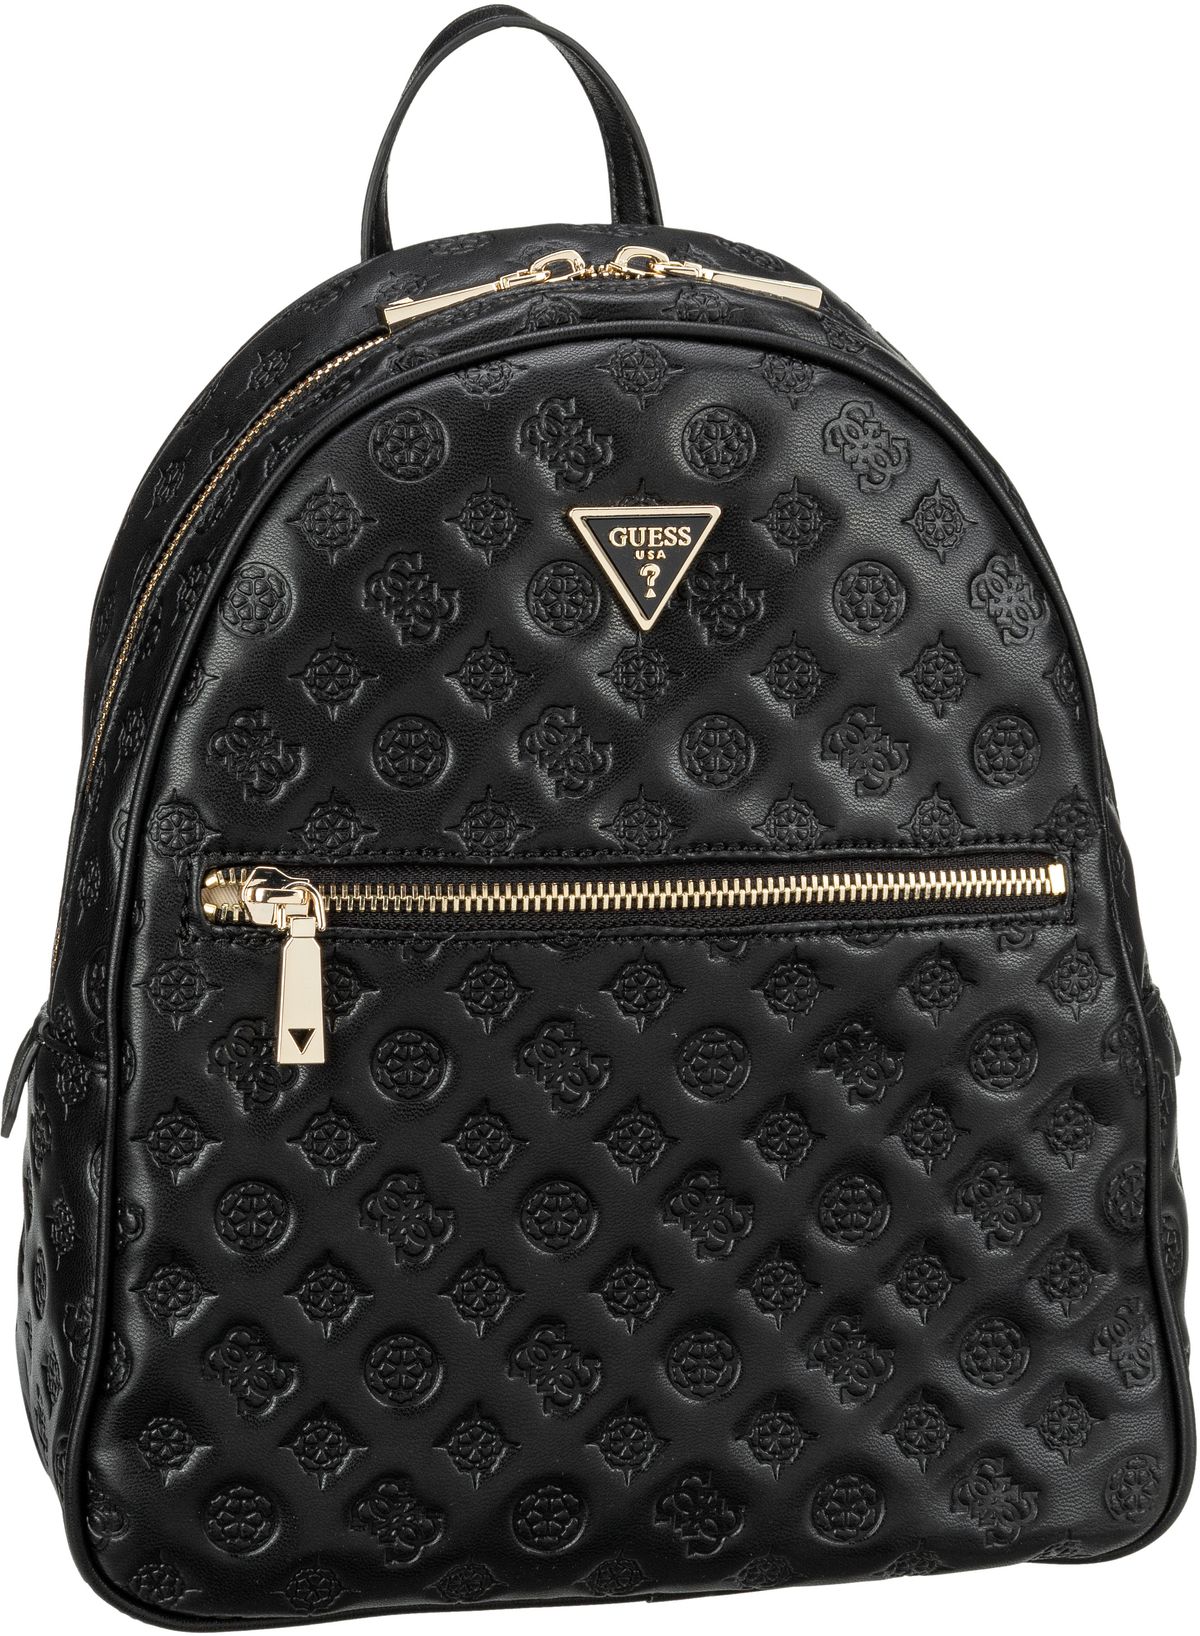 Guess Vikky Backpack LF - Black